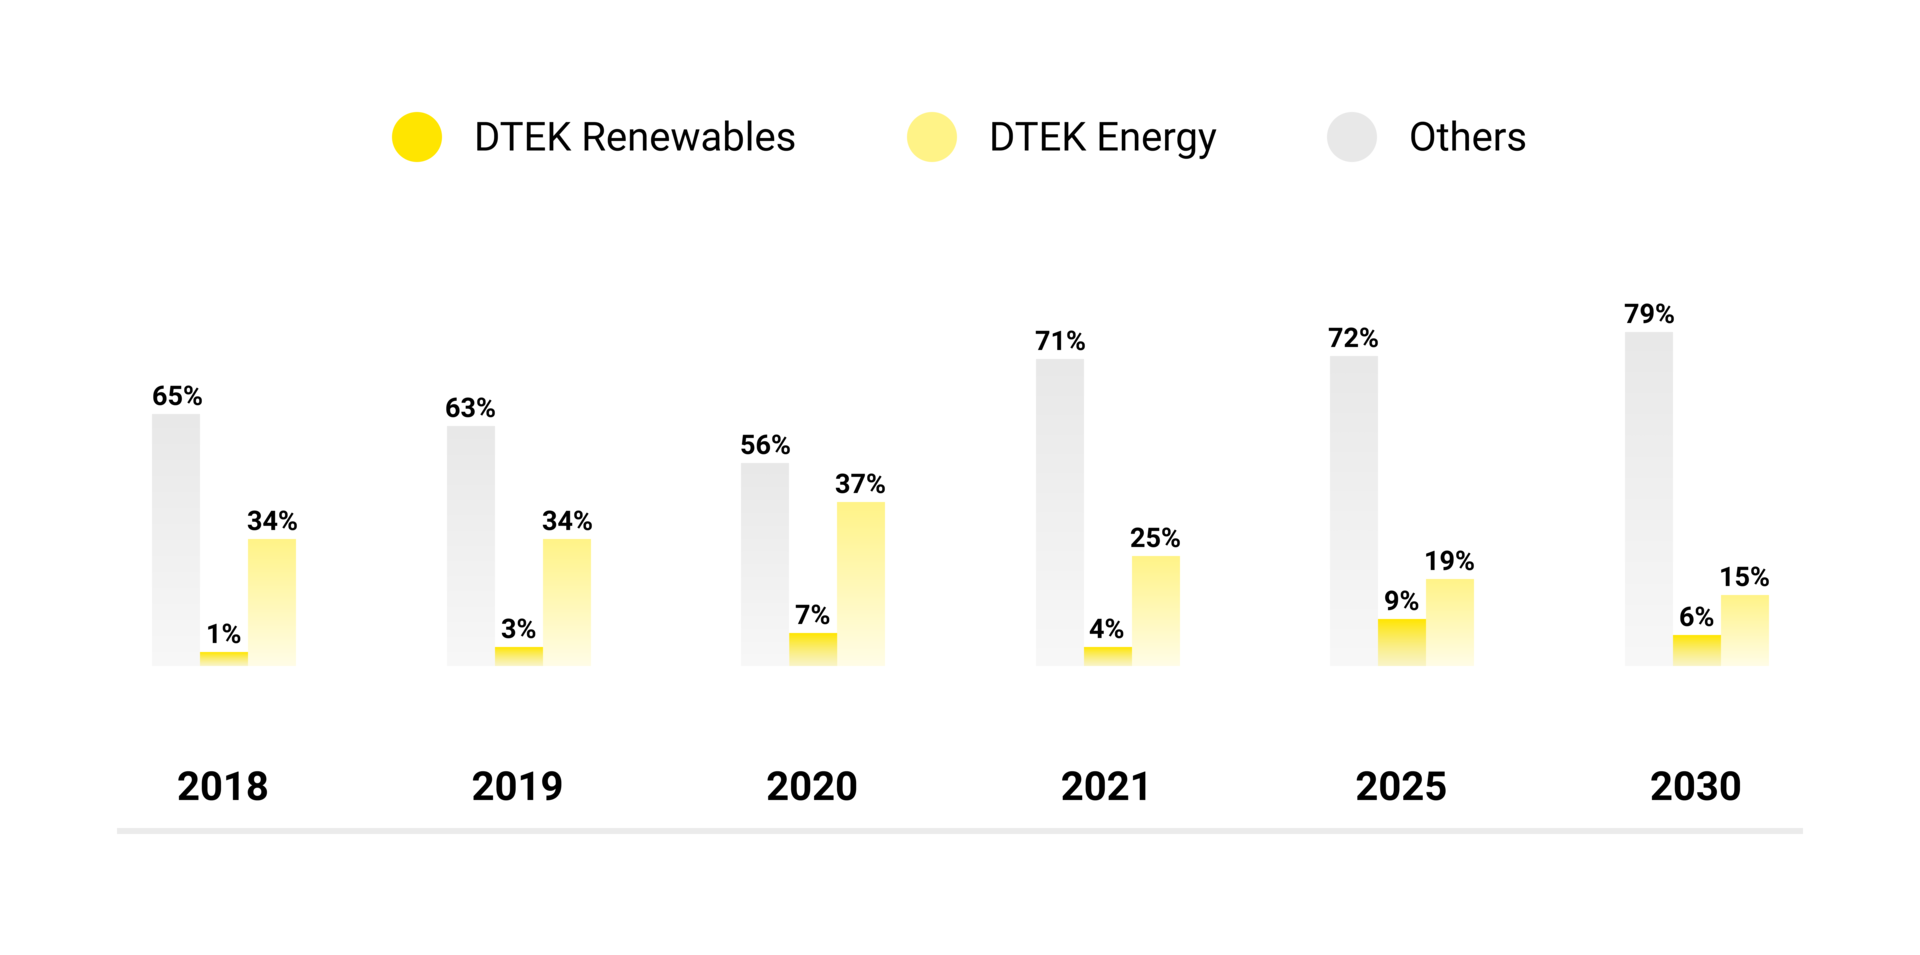 DTEK's strategic goal is to achieve carbon neutrality by 2040. Picture 2